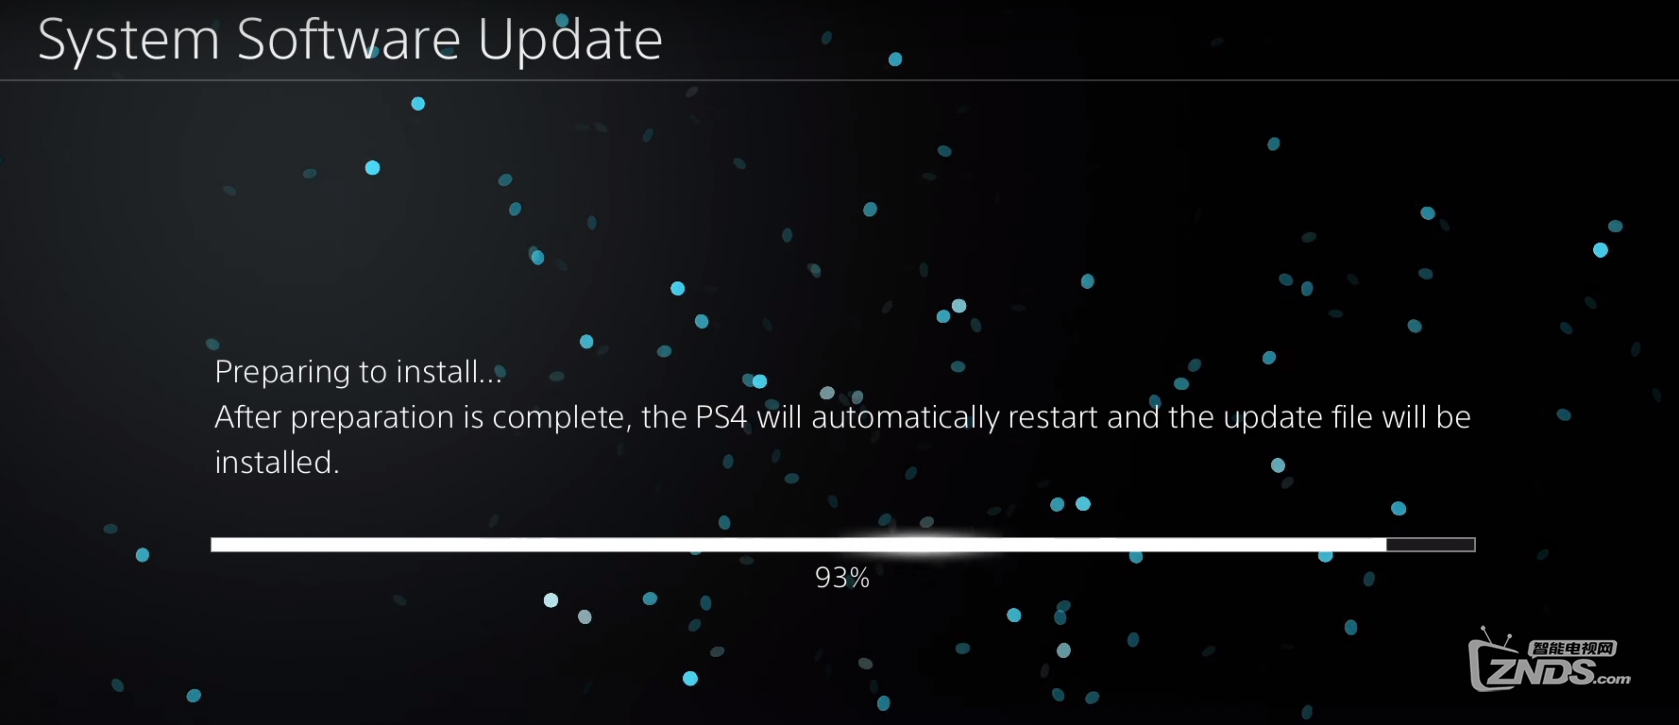 ps4 update file for reinstallation 4.05